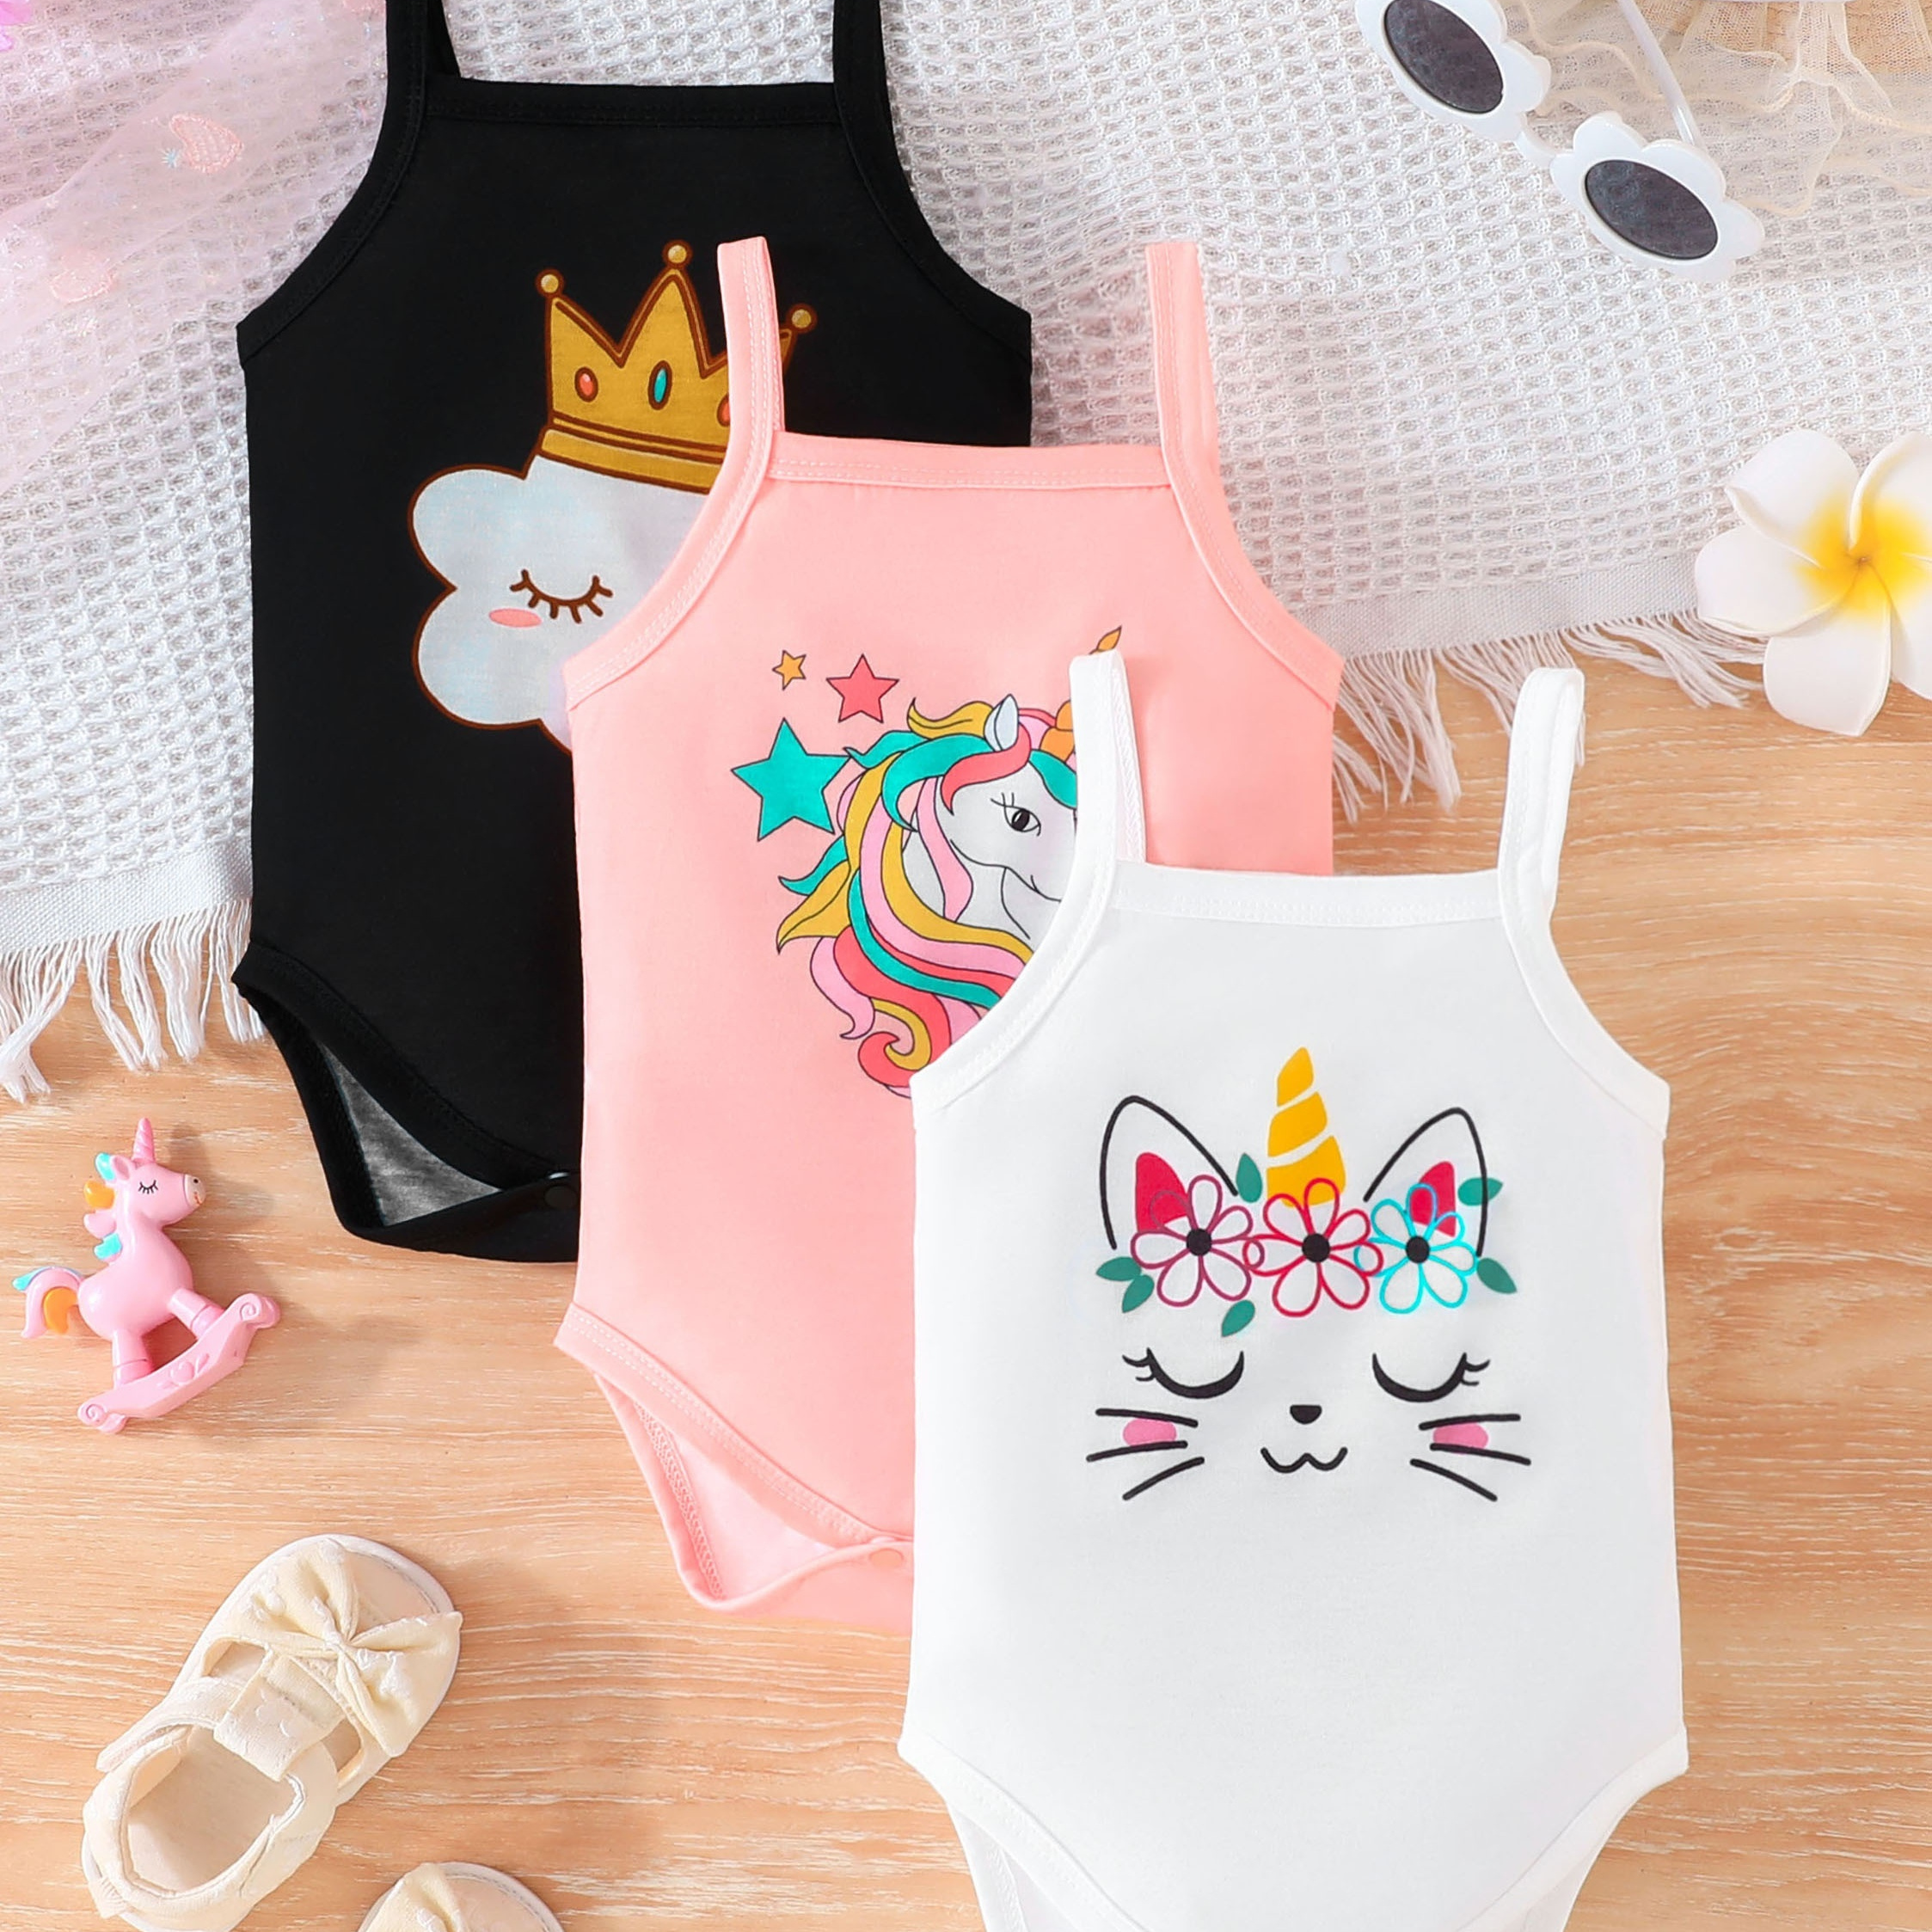 

3pcs Baby's Cartoon Pattern Triangle Bodysuit, Cute Cat & Unicorn & Cloud Print, Casual Sleeveless Romper, Toddler & Infant Girl's Onesie For Summer, As Gift